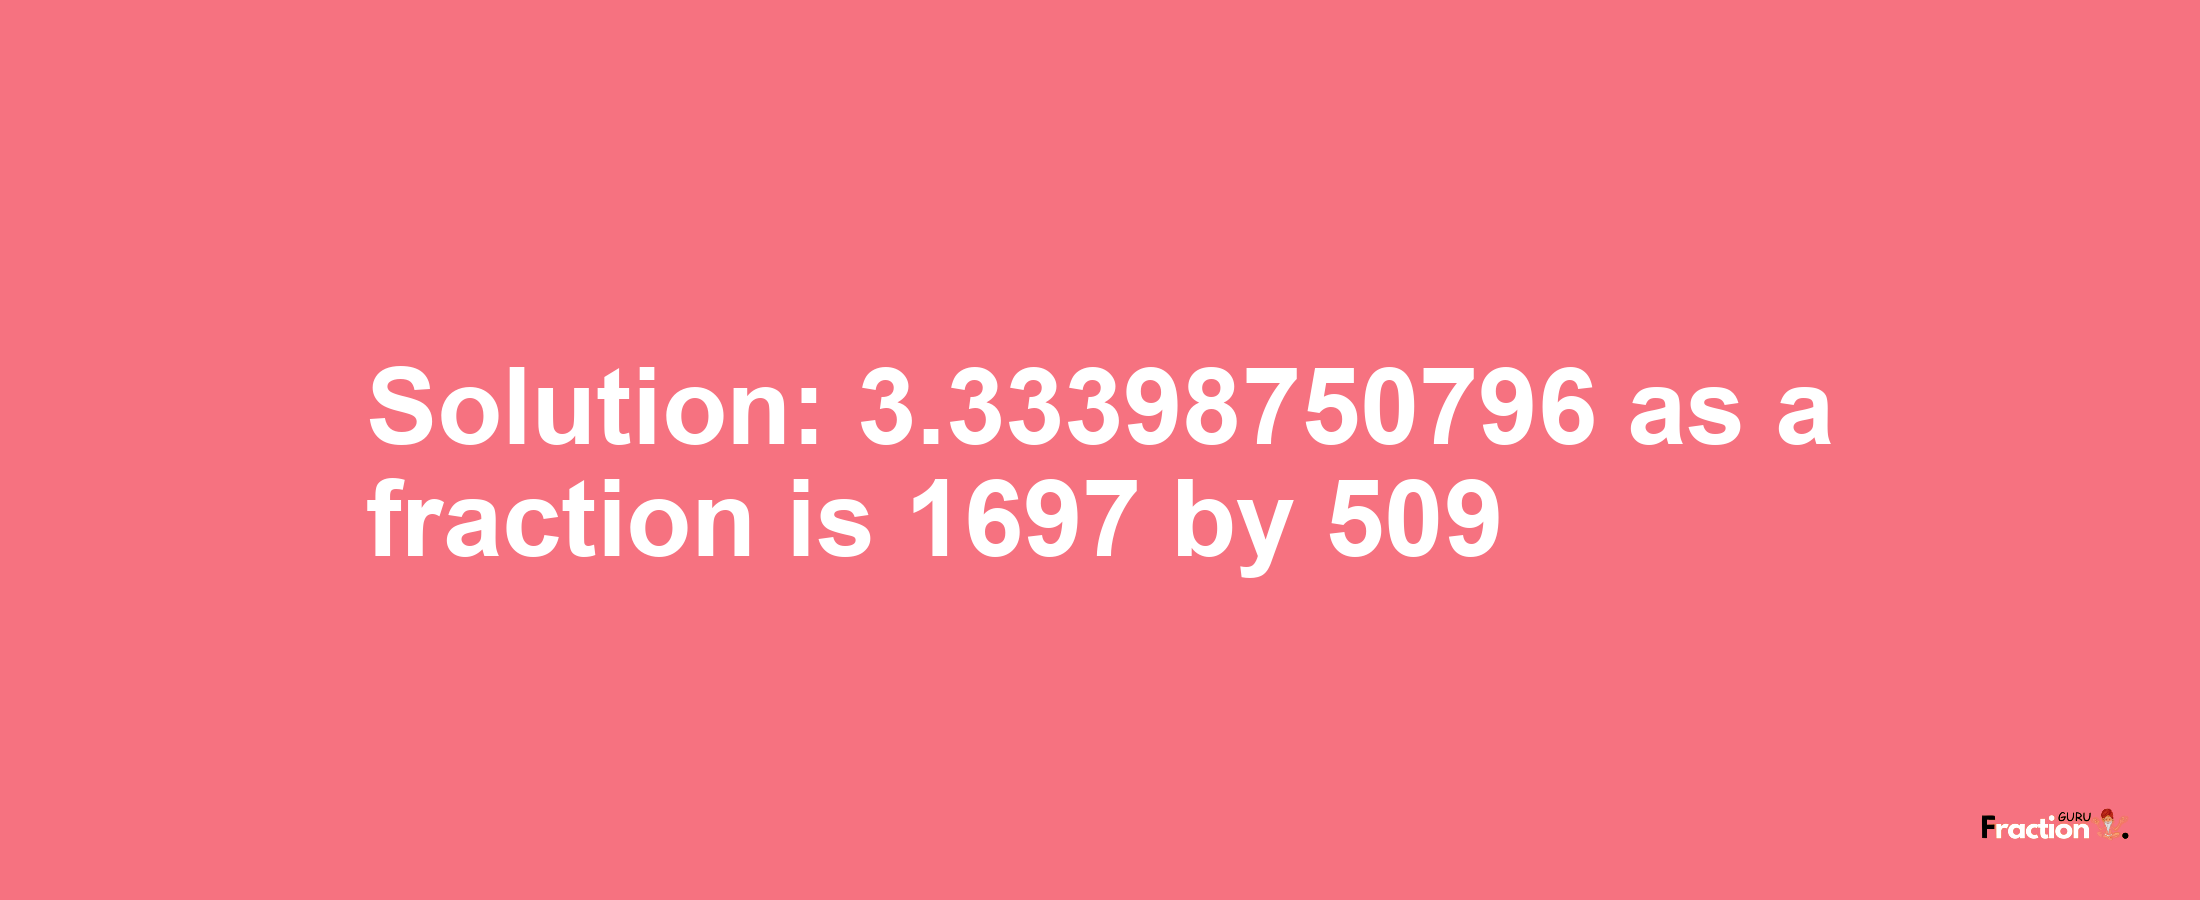 Solution:3.33398750796 as a fraction is 1697/509